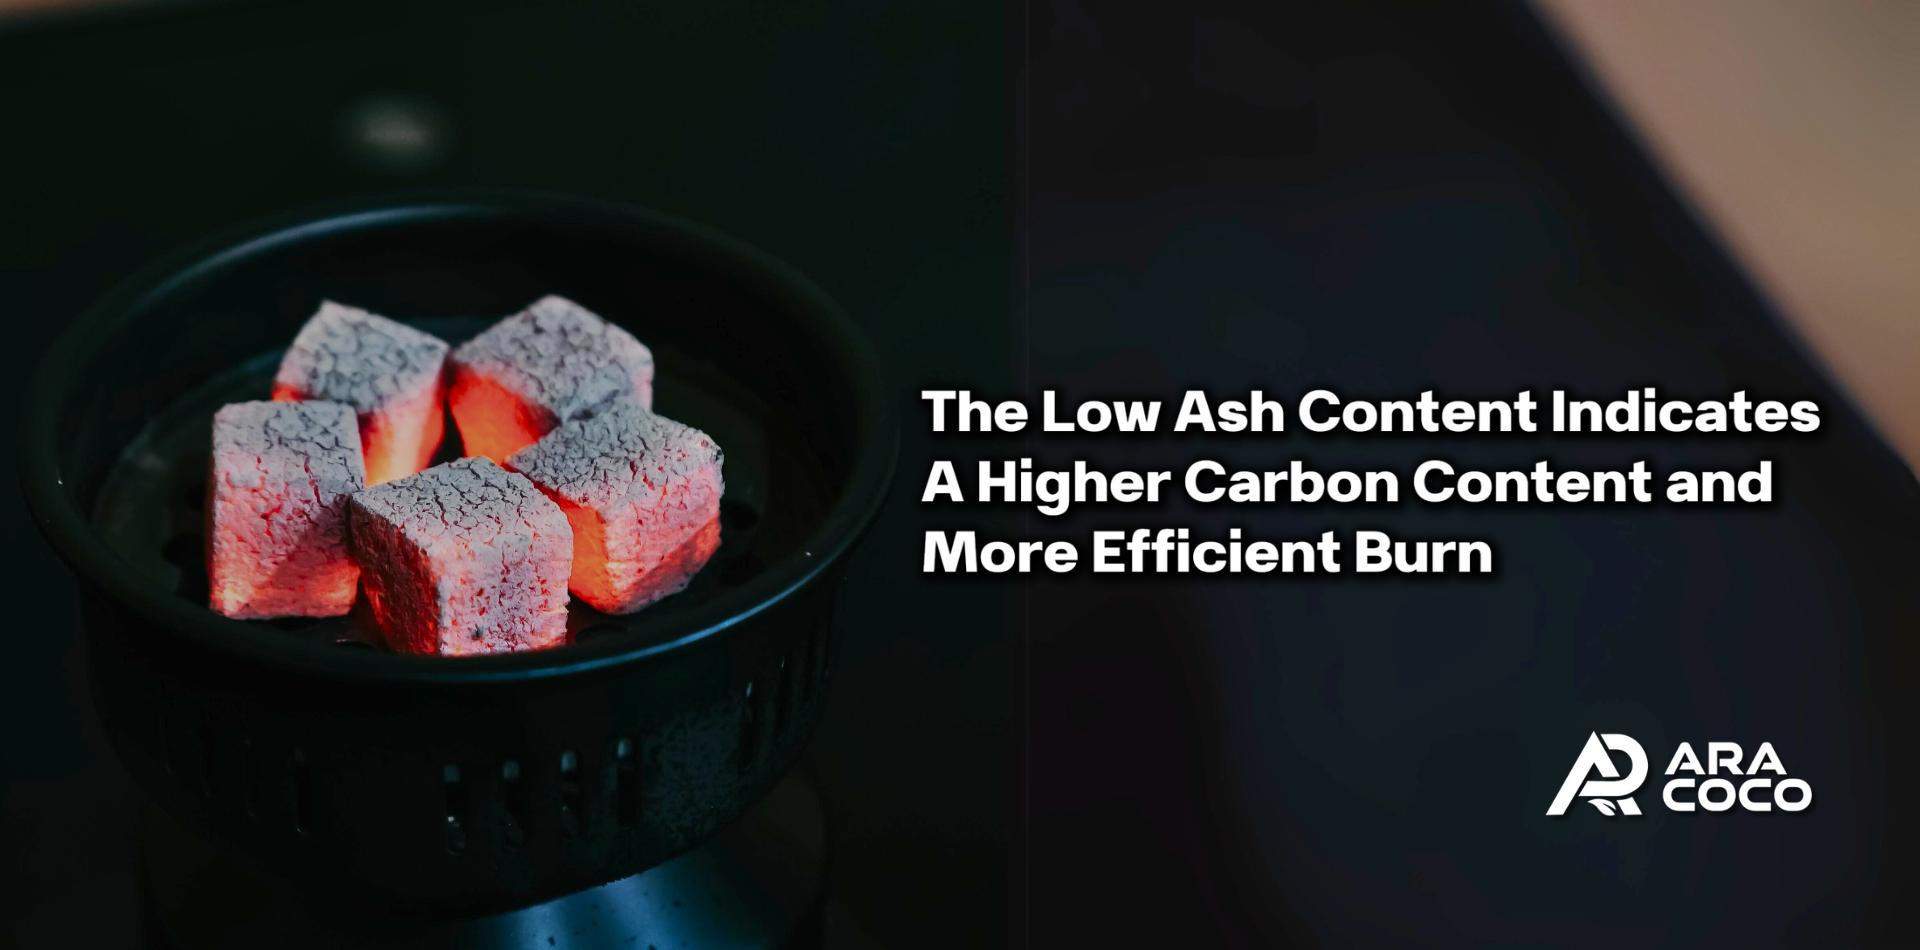 Coconut shell charcoal produces minimal ash, making it a cleaner option for shisha smoking. 